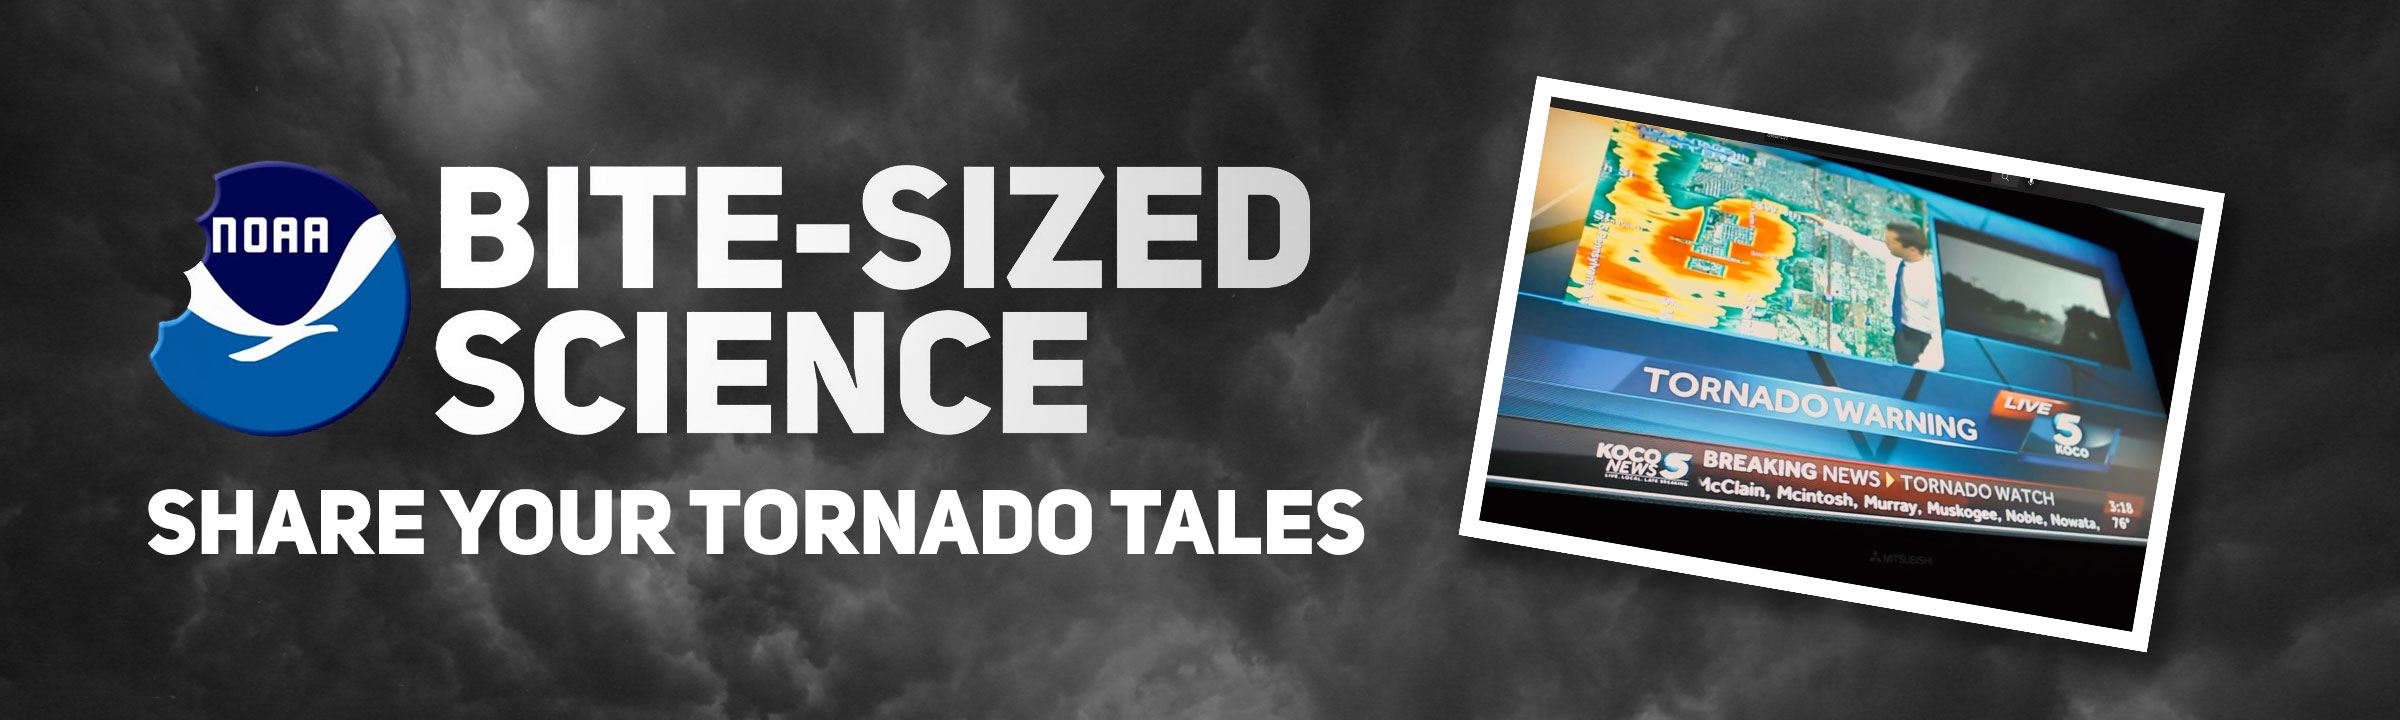 Bite-Sized Science: Share Your Tornado Tales